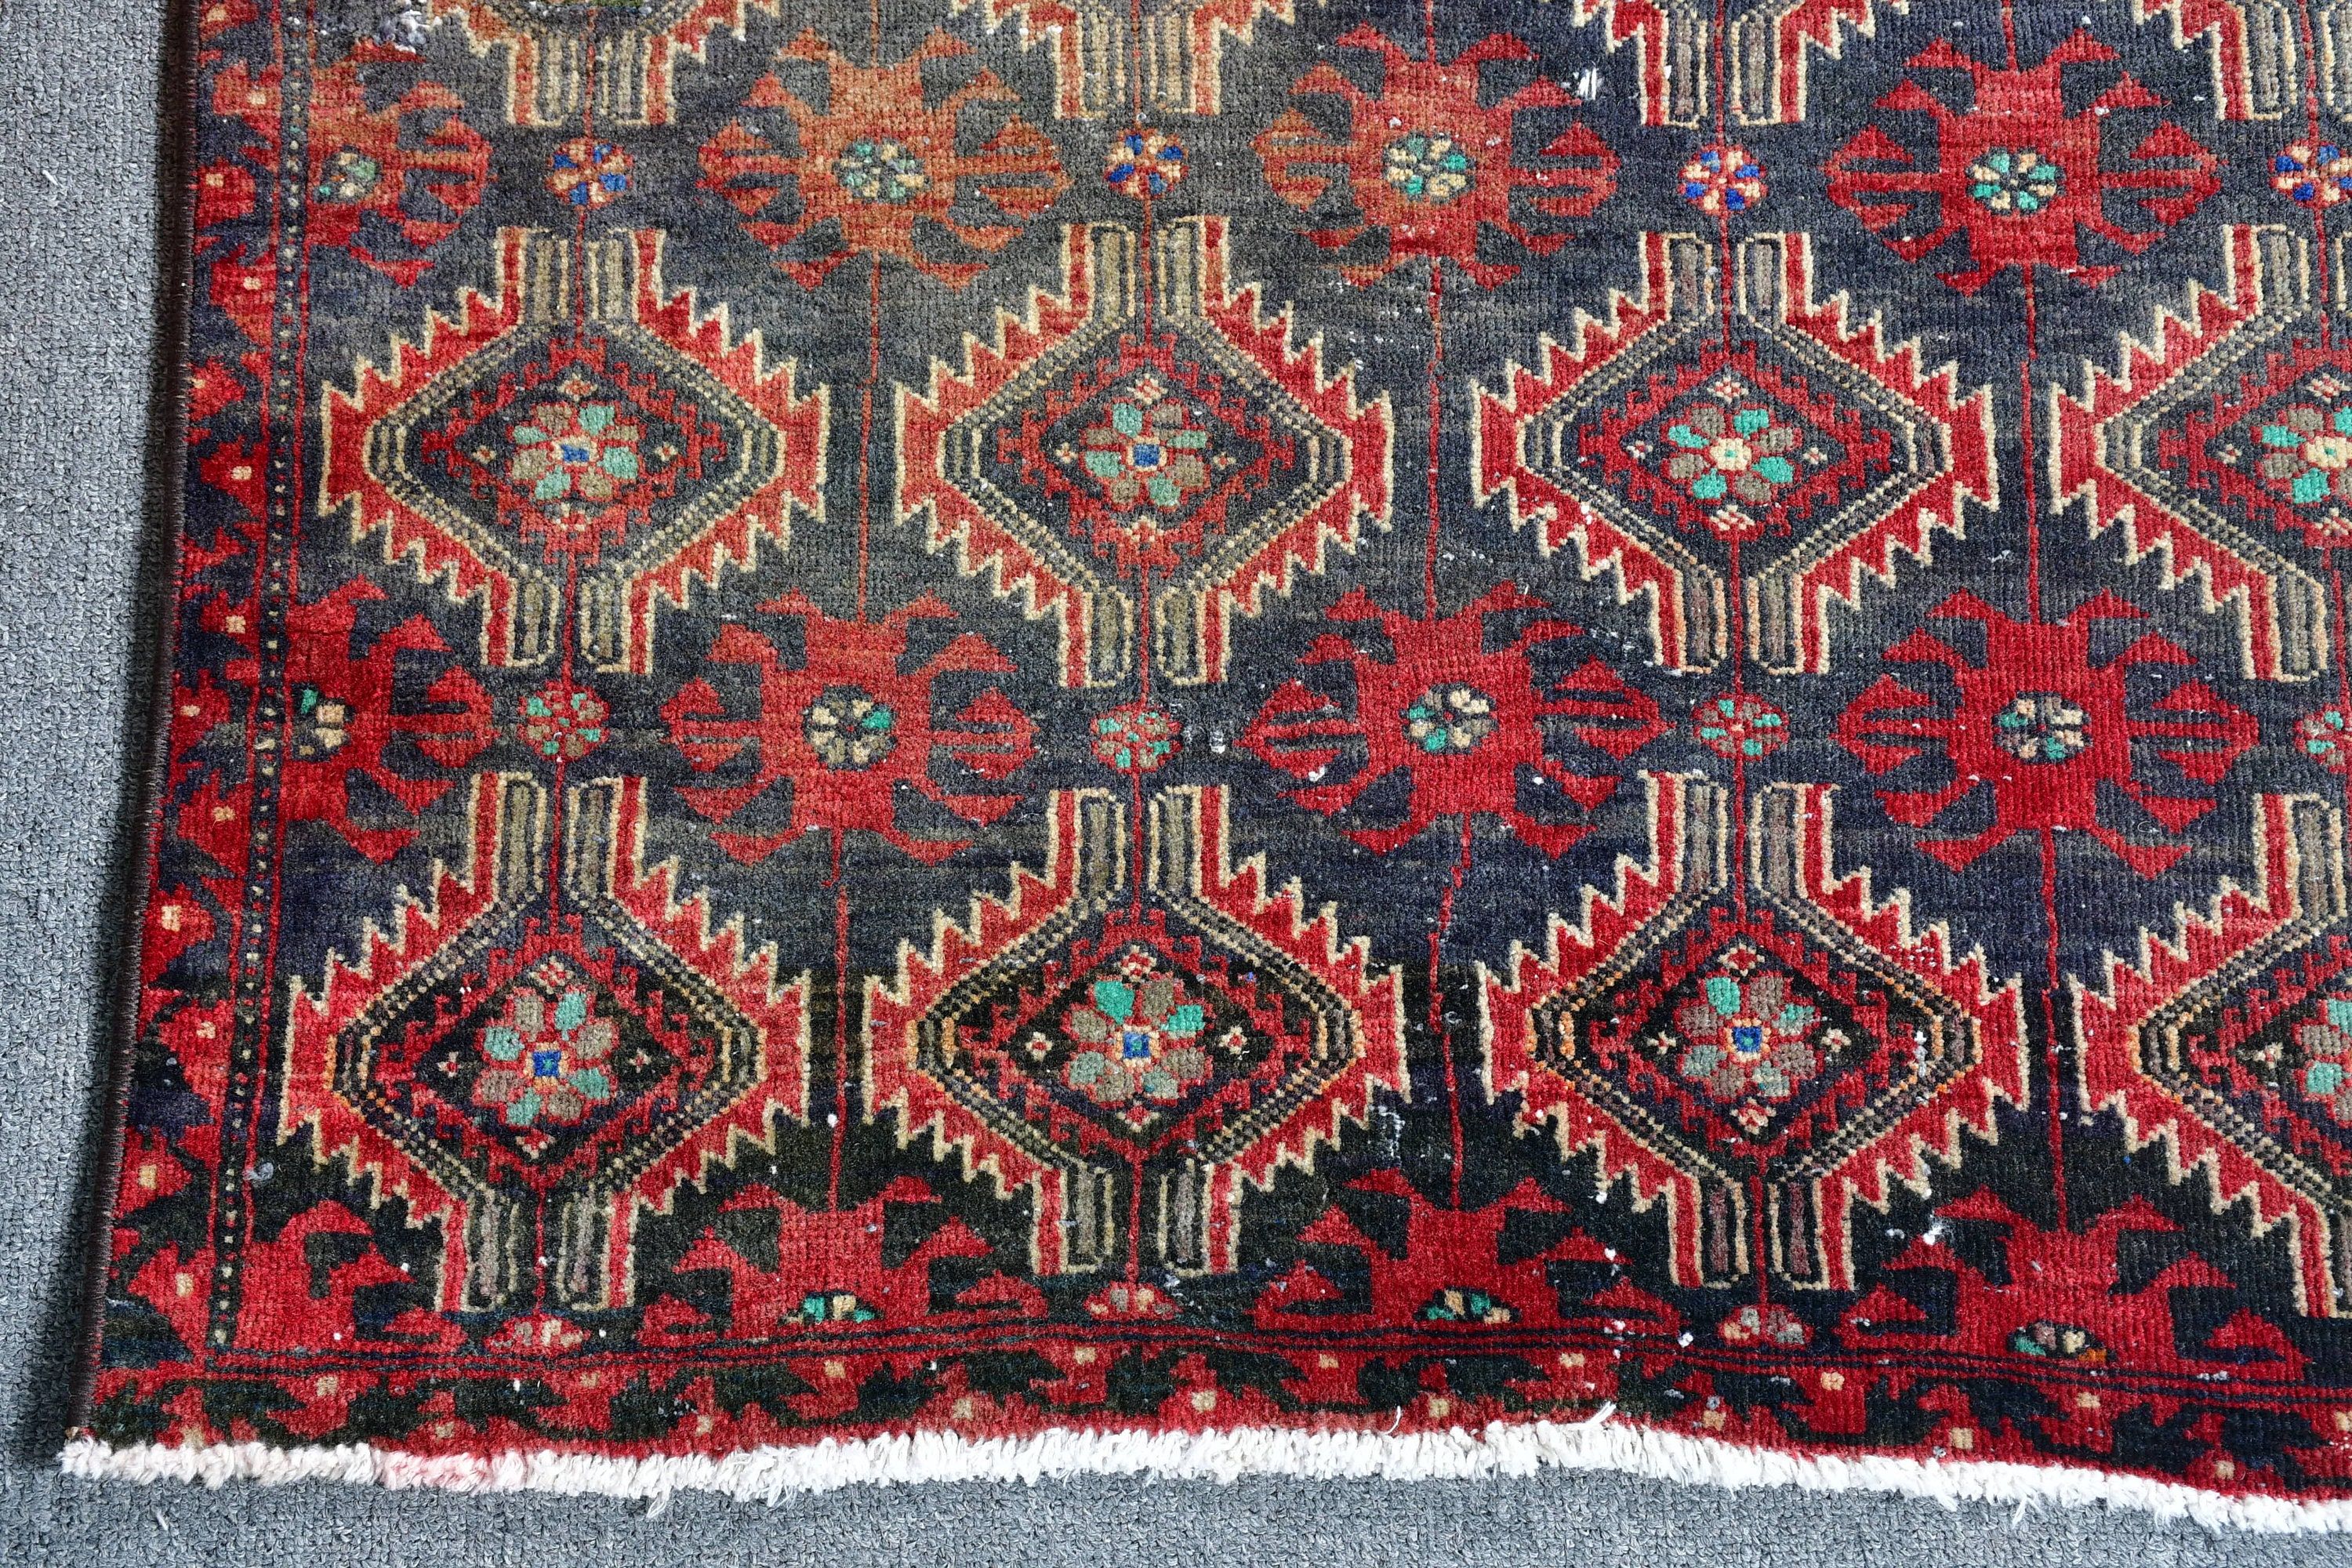 Rugs for Entry, Black Antique Rug, Vintage Rug, Car Mat Rug, Moroccan Rug, Antique Rugs, 2.6x5.4 ft Small Rugs, Bathroom Rugs, Turkish Rug